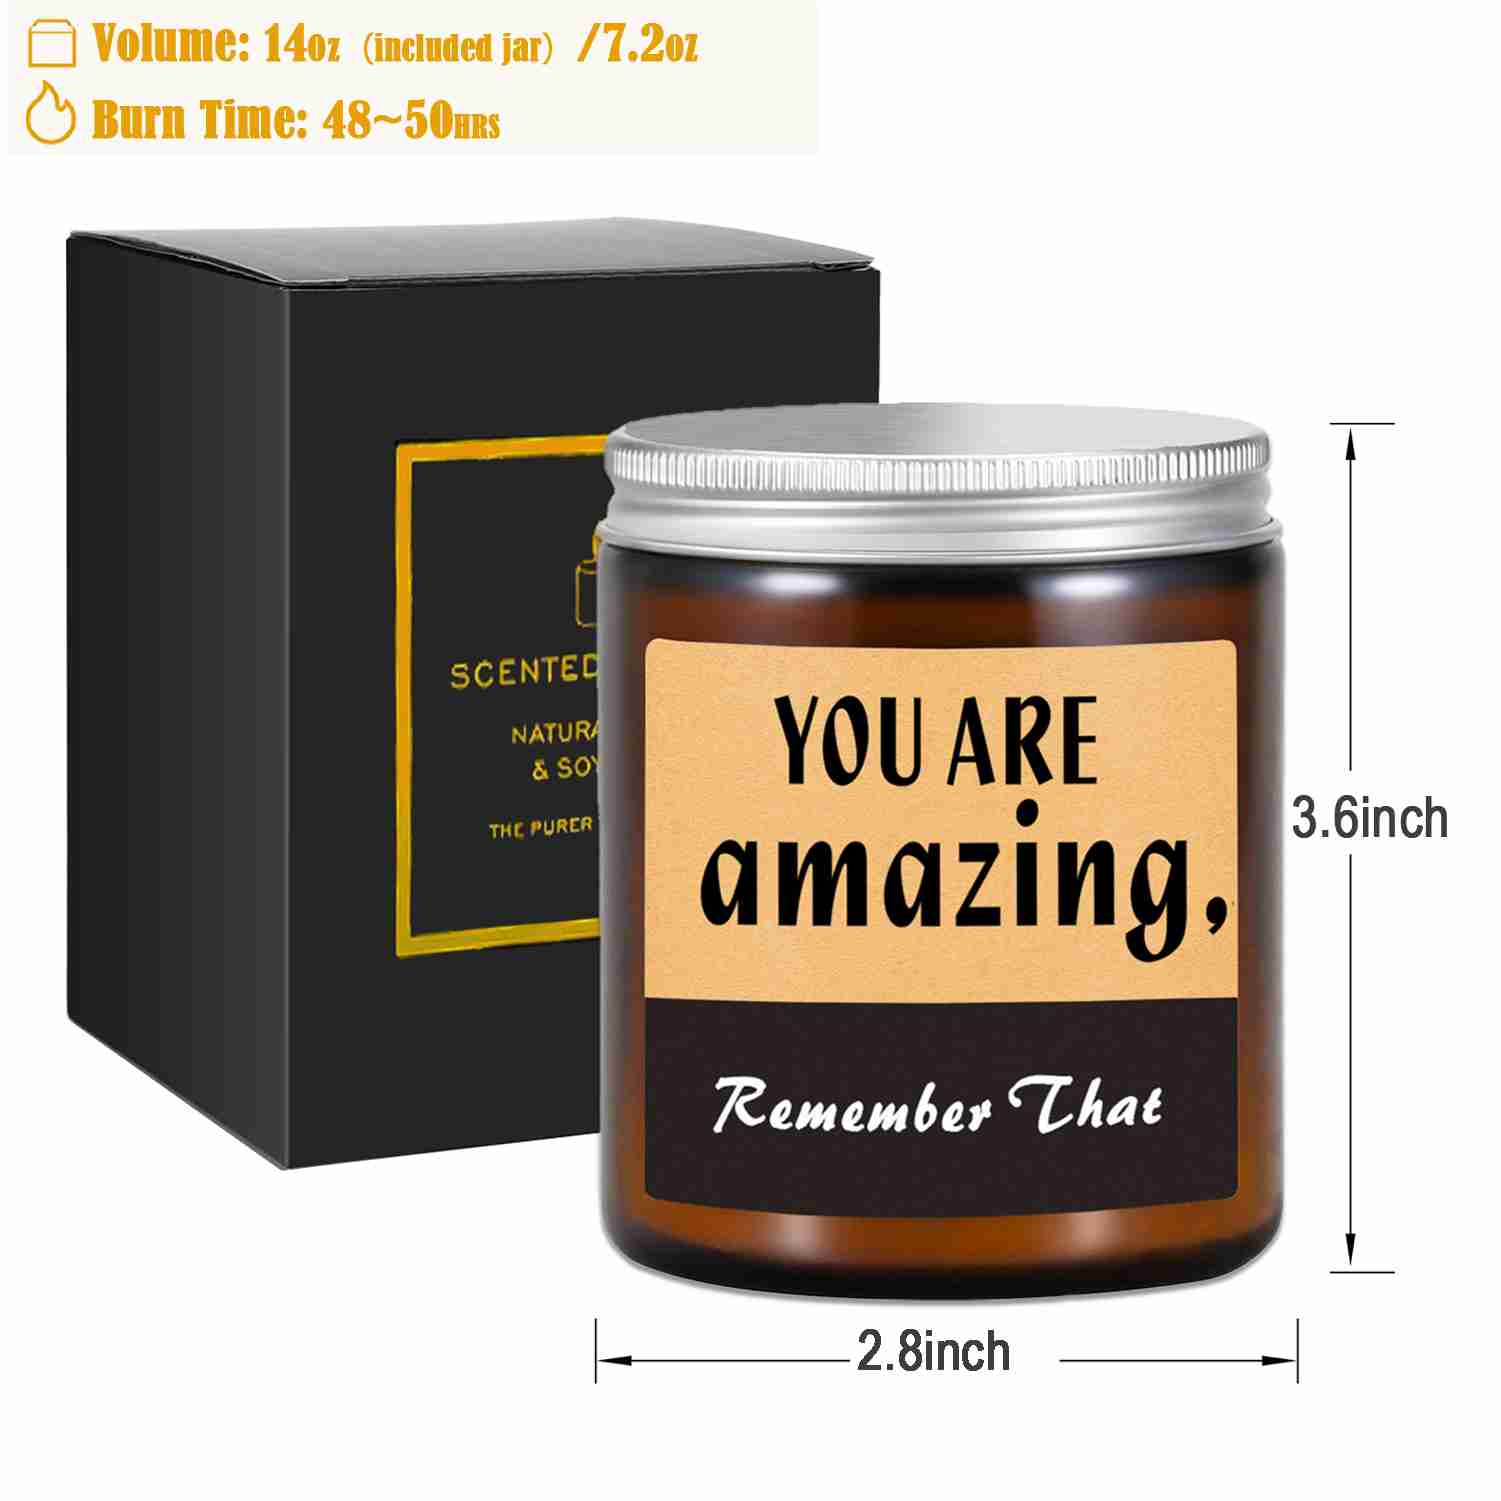 scented-candles with discount code